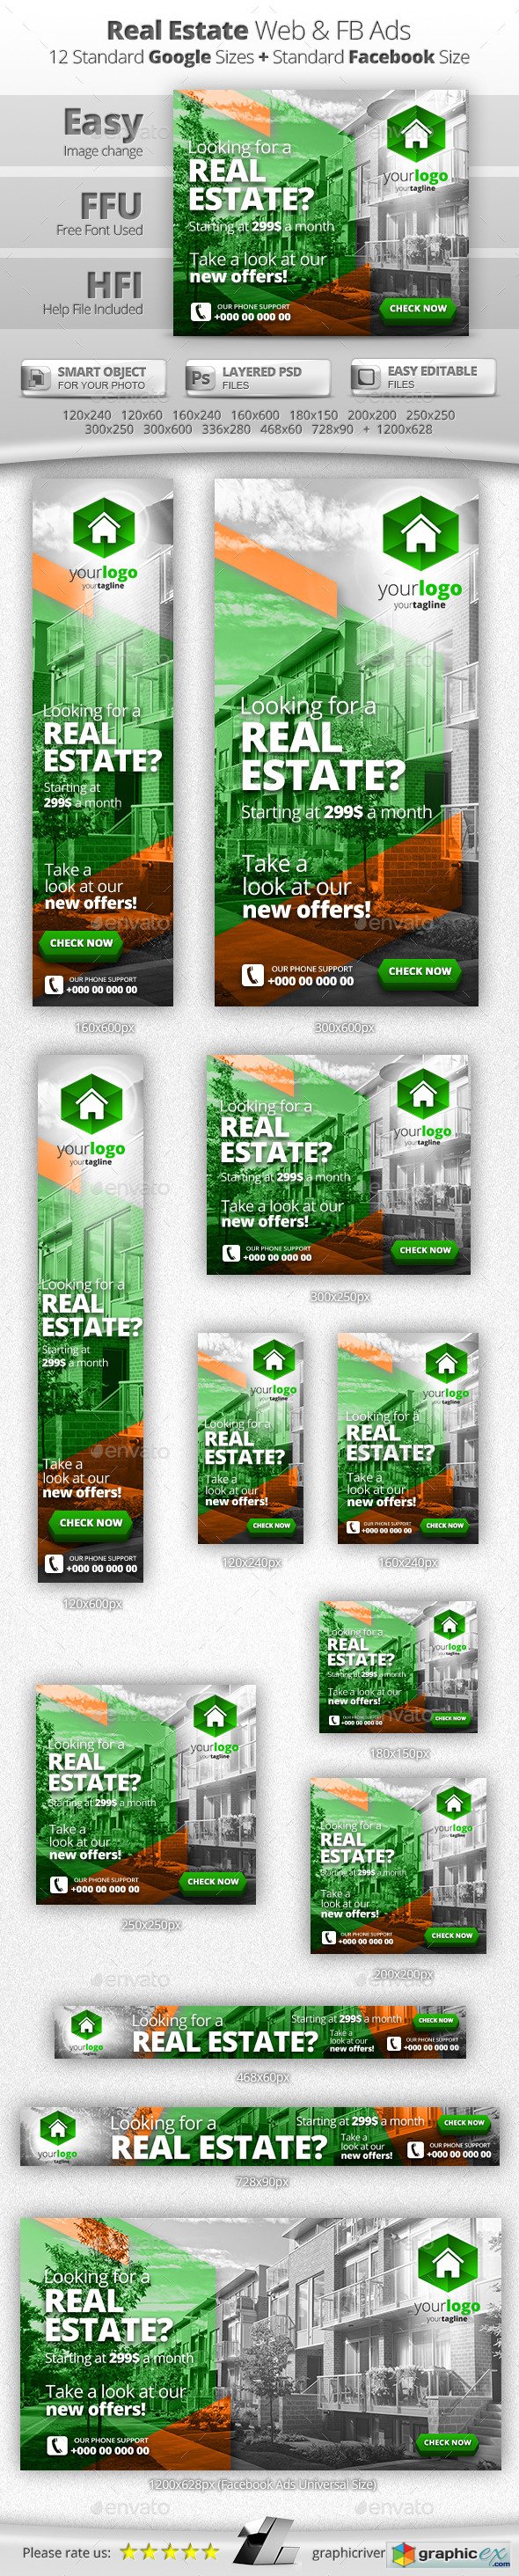 Real Estate Web & Facebook Banners Ads